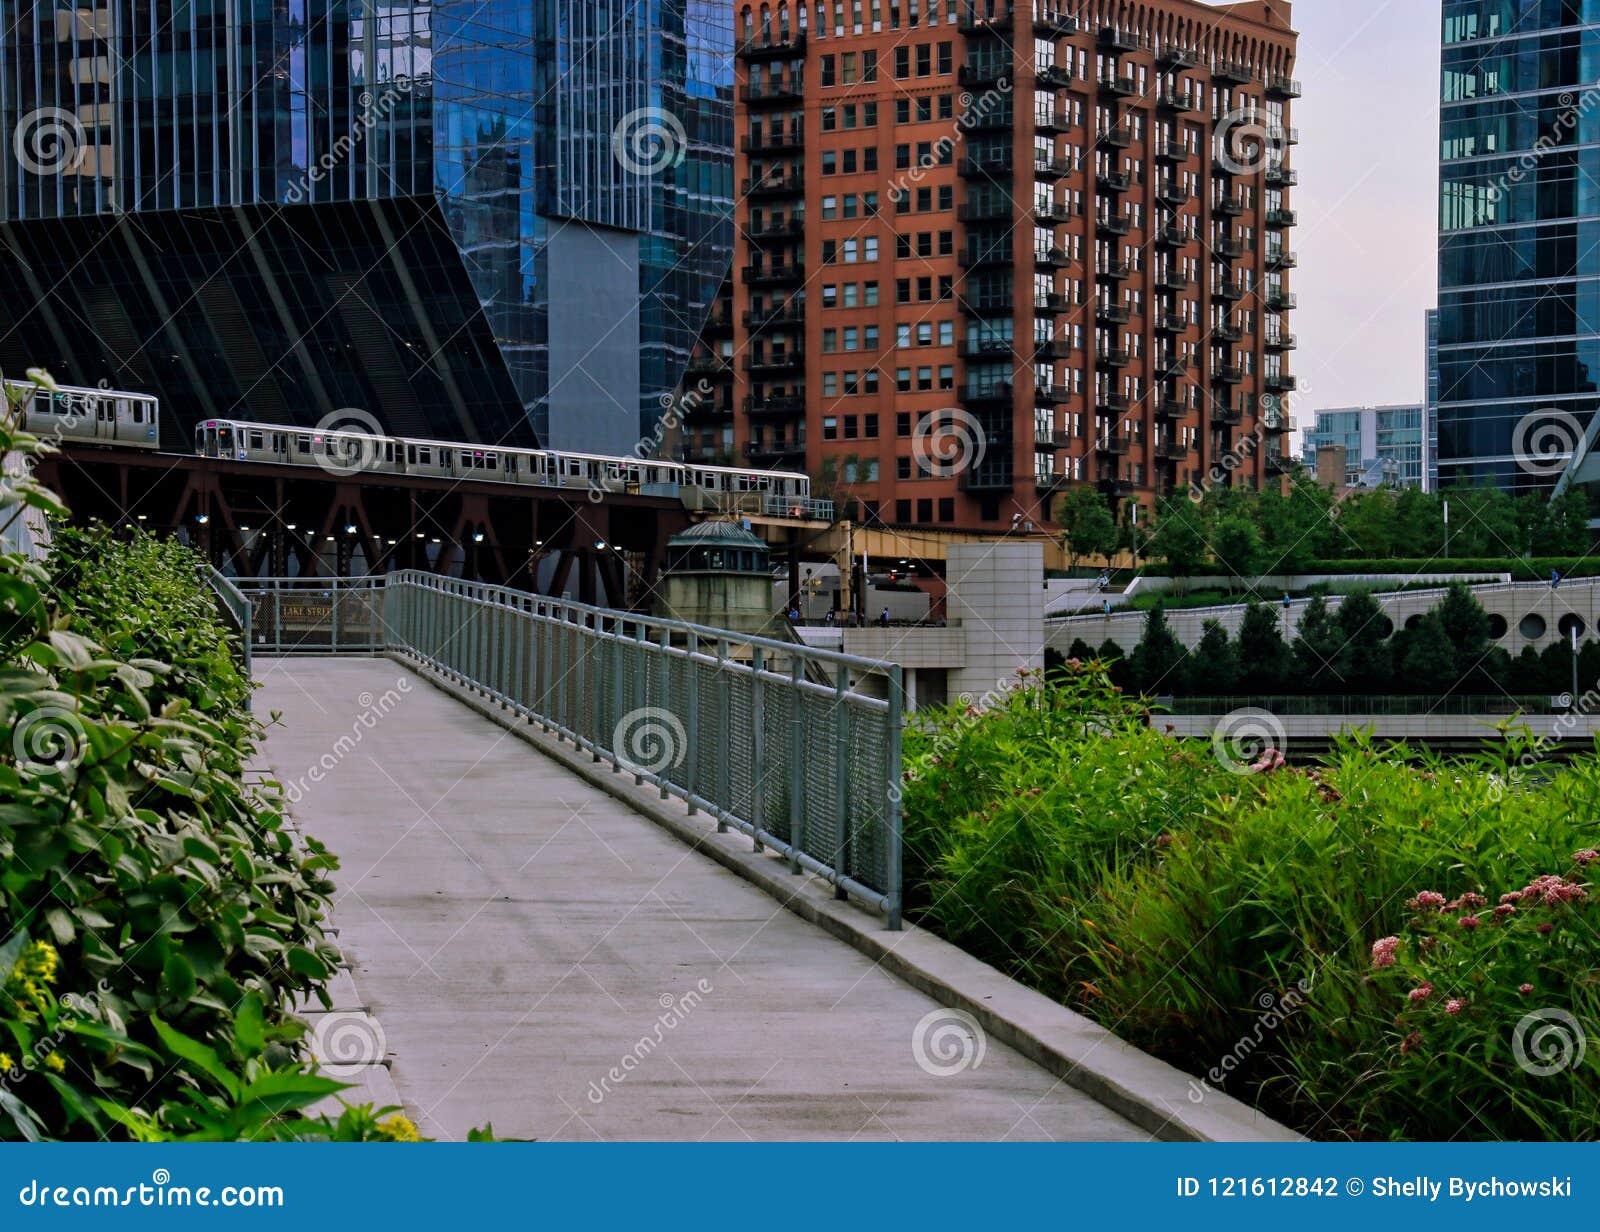 river walk ramp leading up to wacker drive with elevated `el` trains crossing over chicago river.